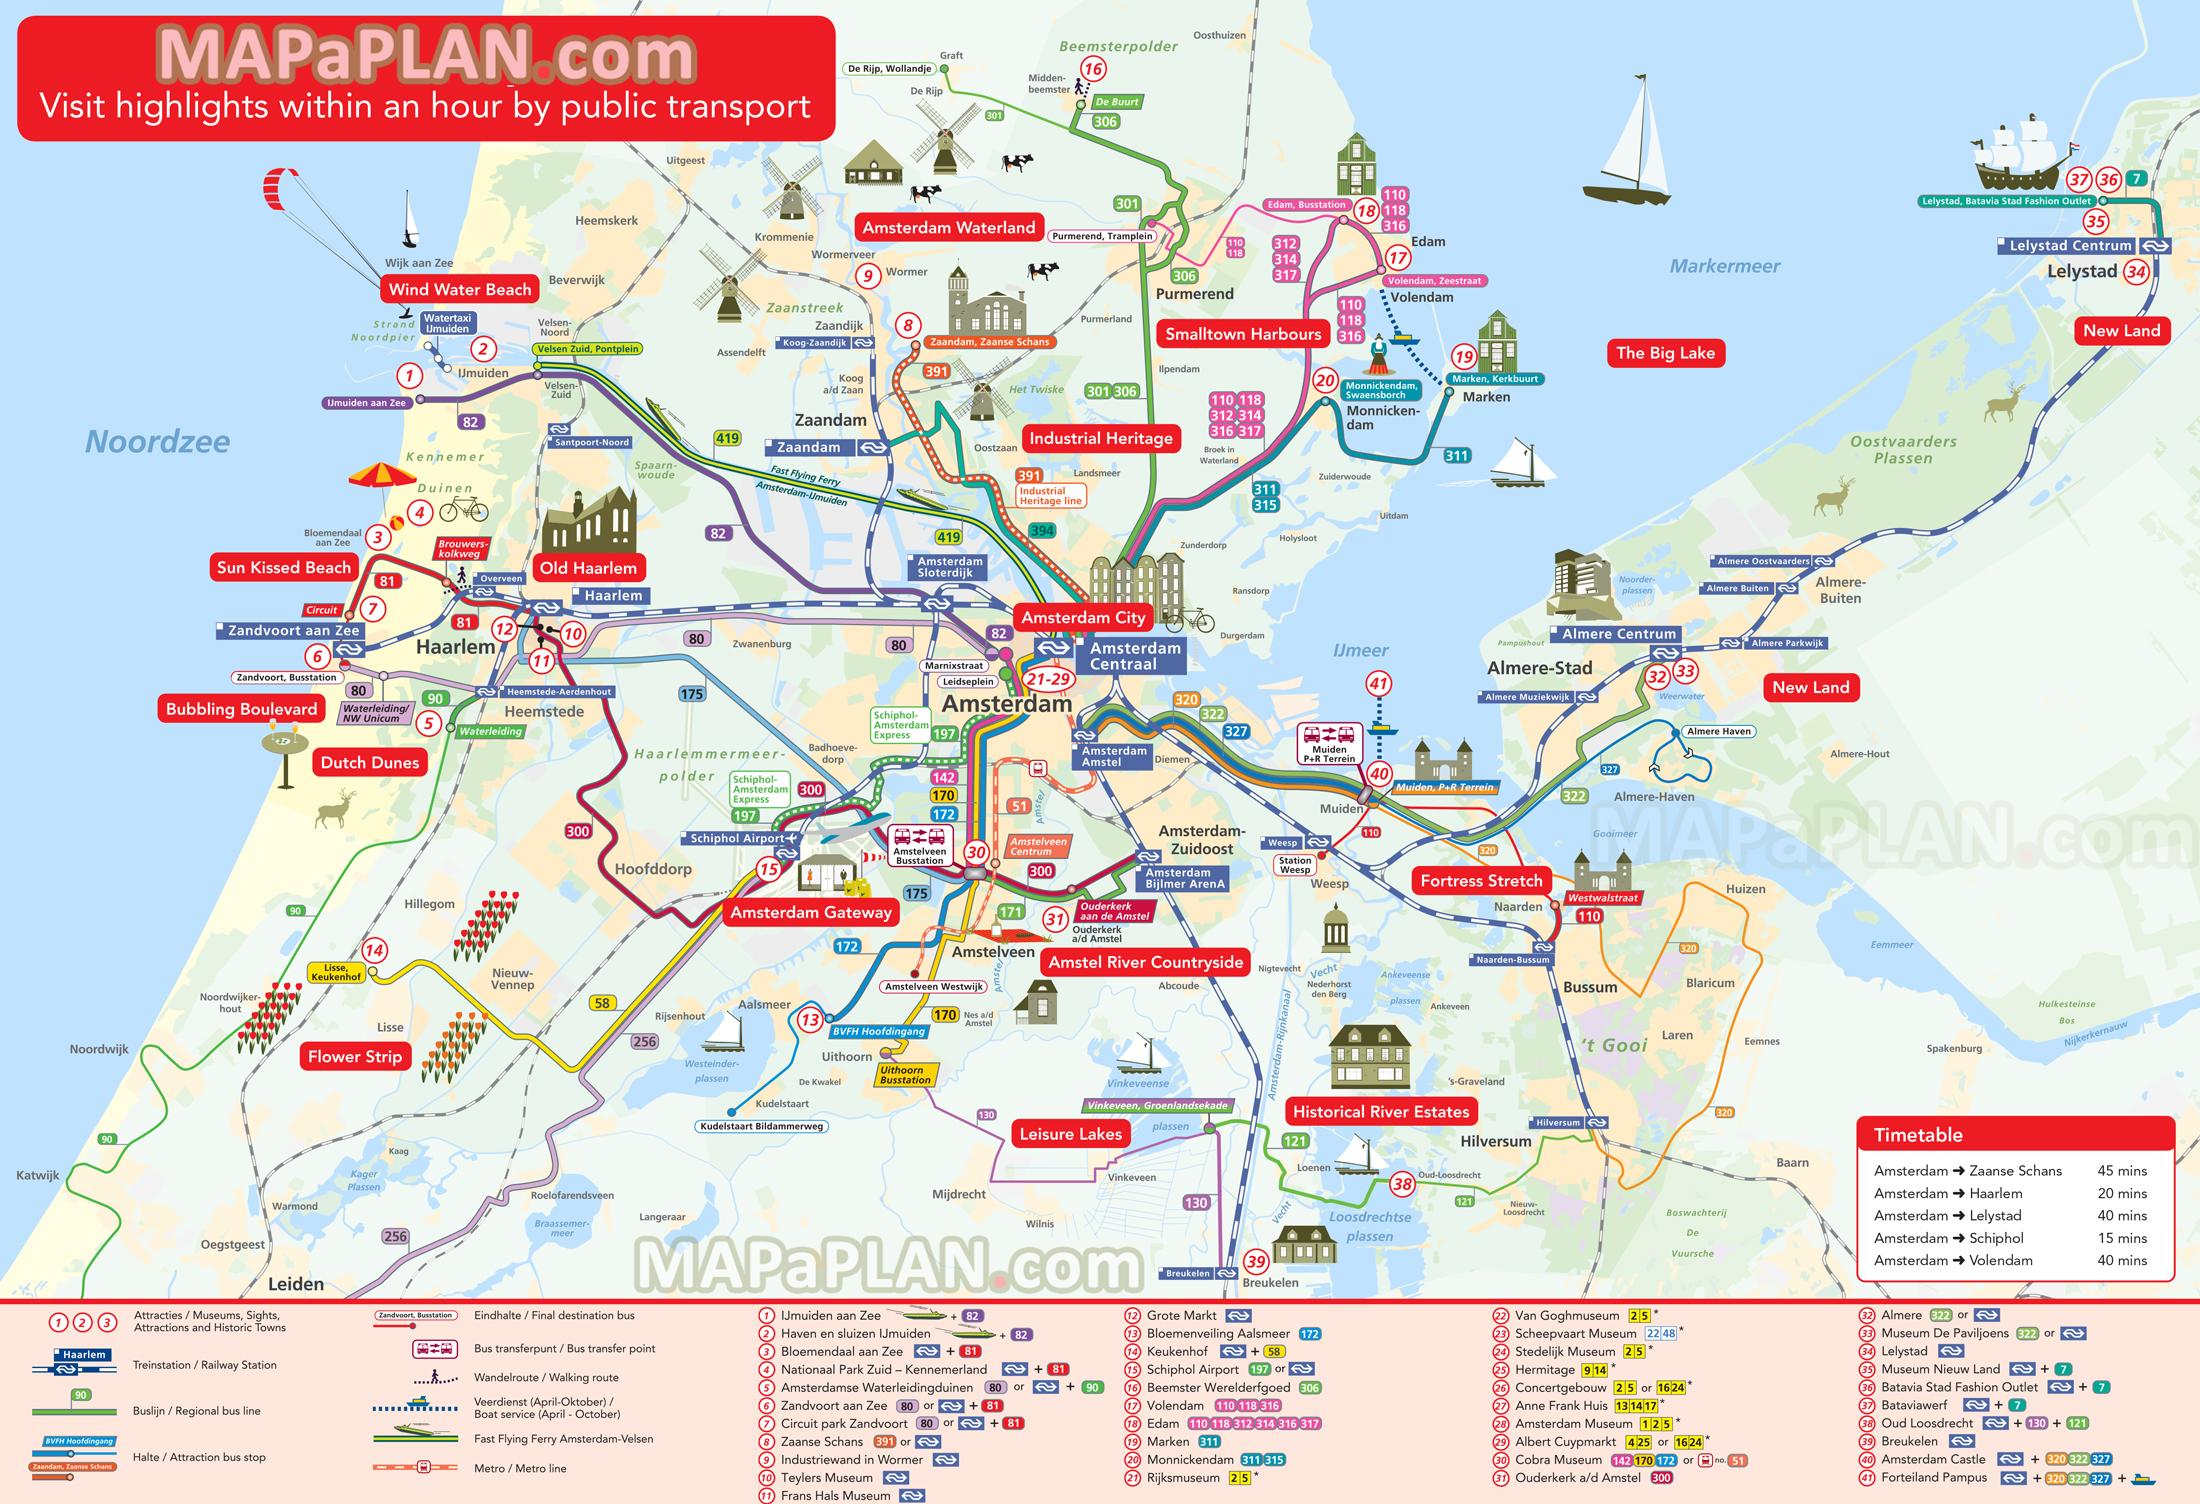 netherlands tourist attractions map